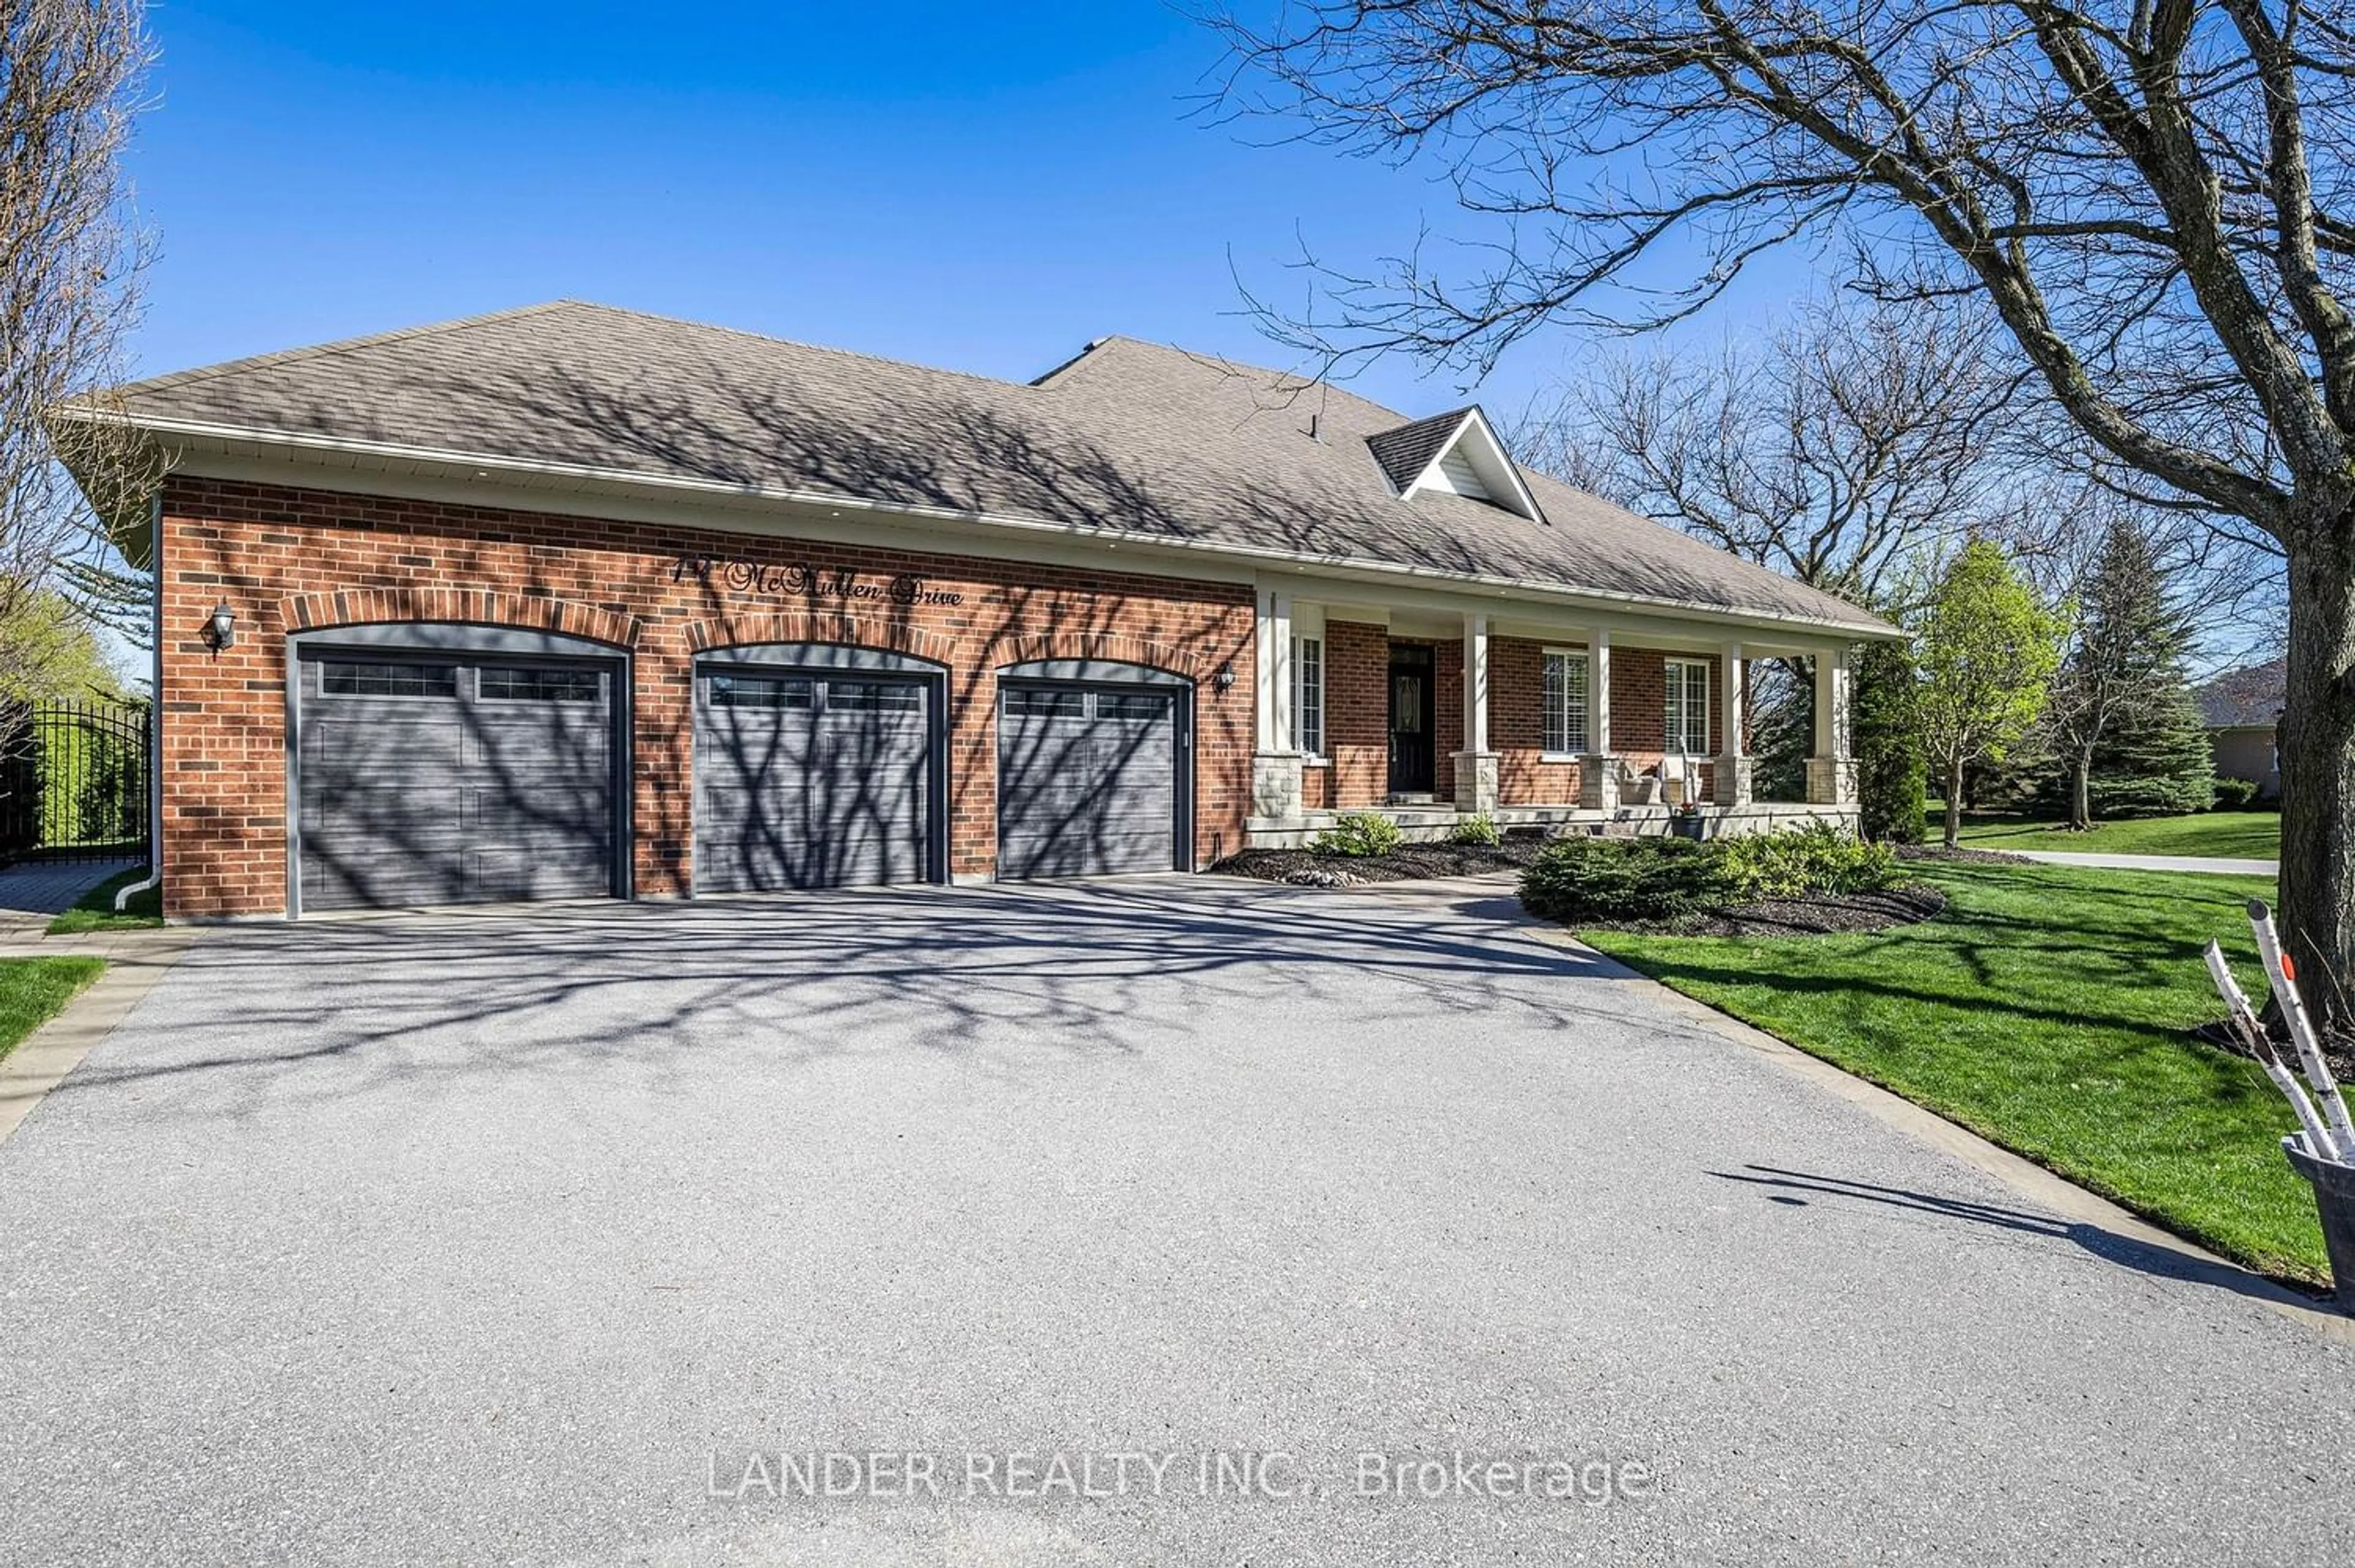 Home with brick exterior material for 19 Mcmullen Dr, Whitchurch-Stouffville Ontario L4A 7X4